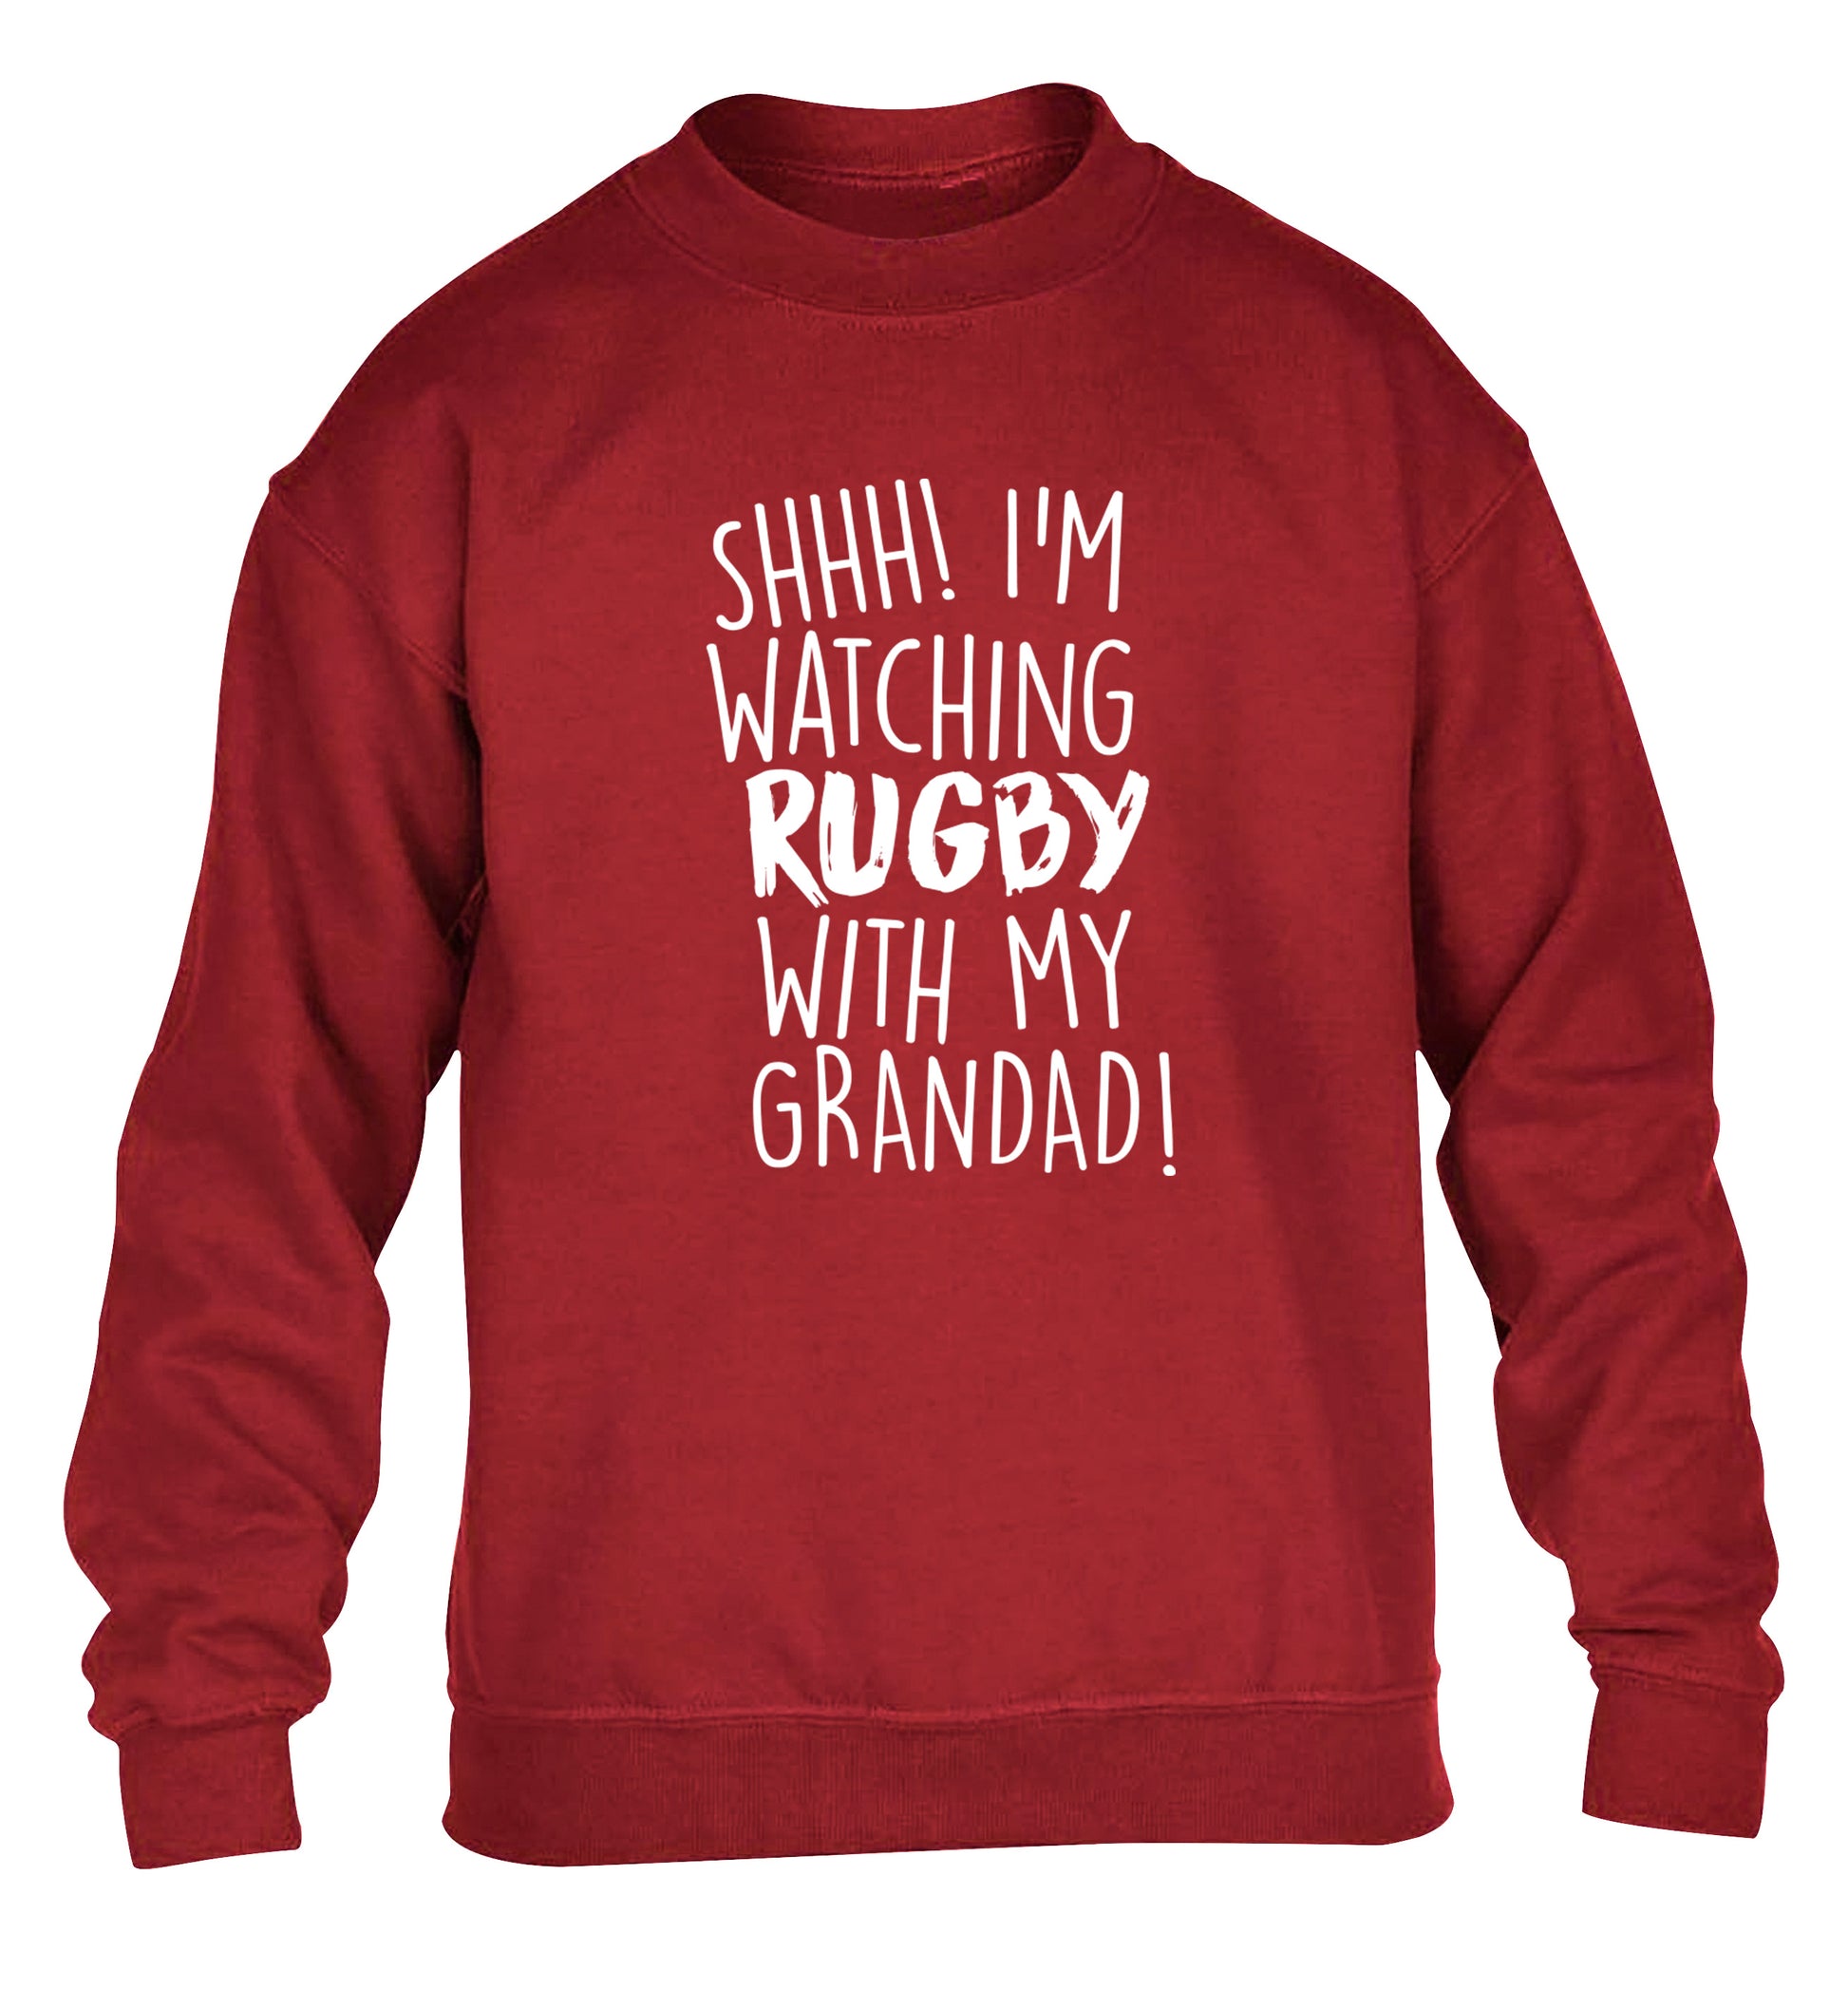 Shh I'm watching rugby with my grandad children's grey sweater 12-13 Years